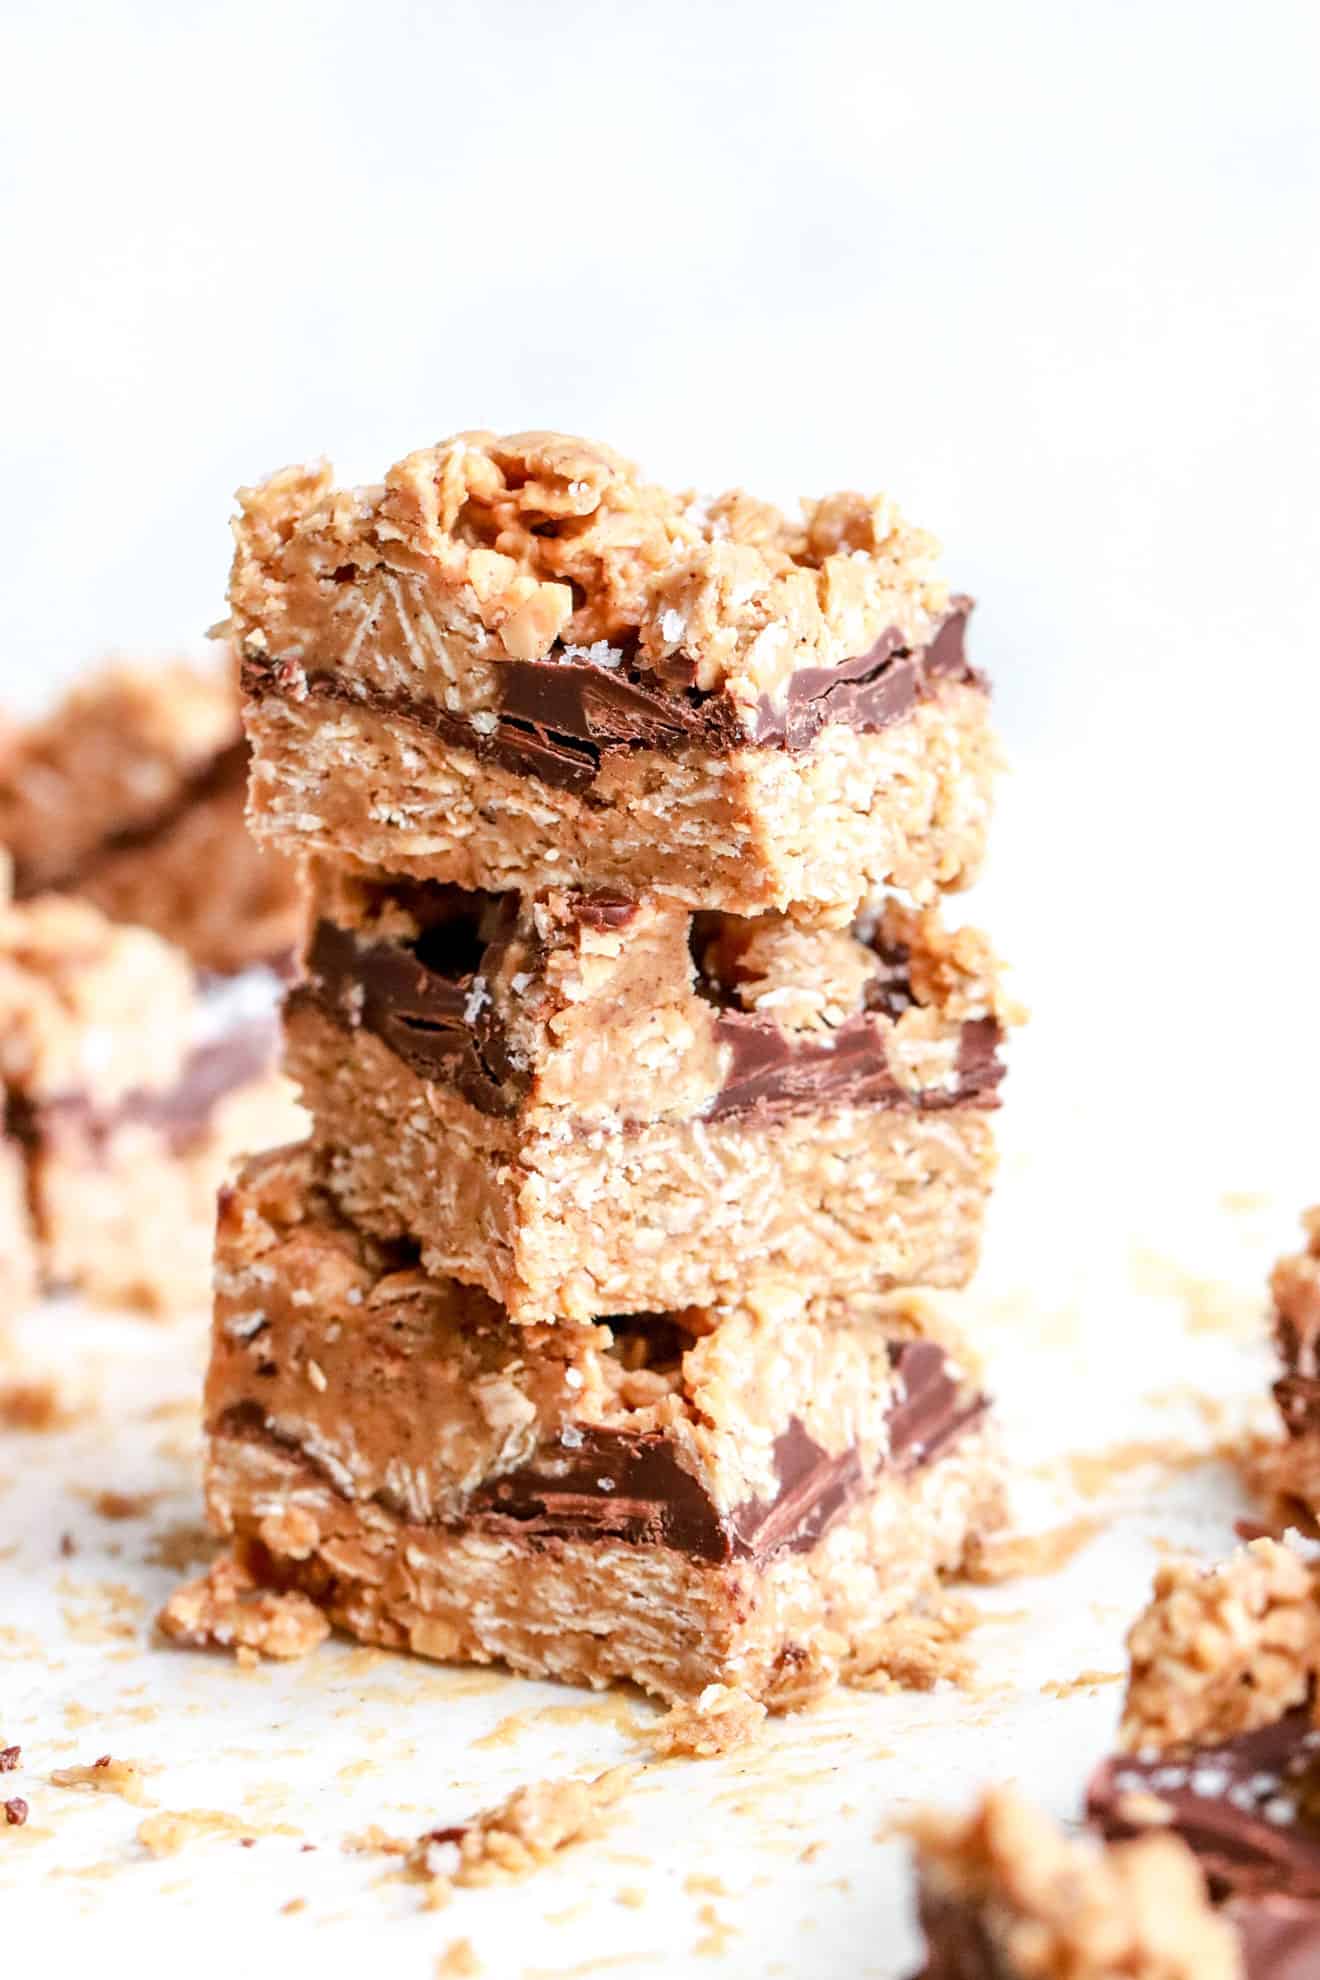 This image is of a stack of no bake oatmeal bars with bars in the foreground and more blurred in the background on white table. The bars have a visible layer of chocolate and are sprinkled with flakey salt.